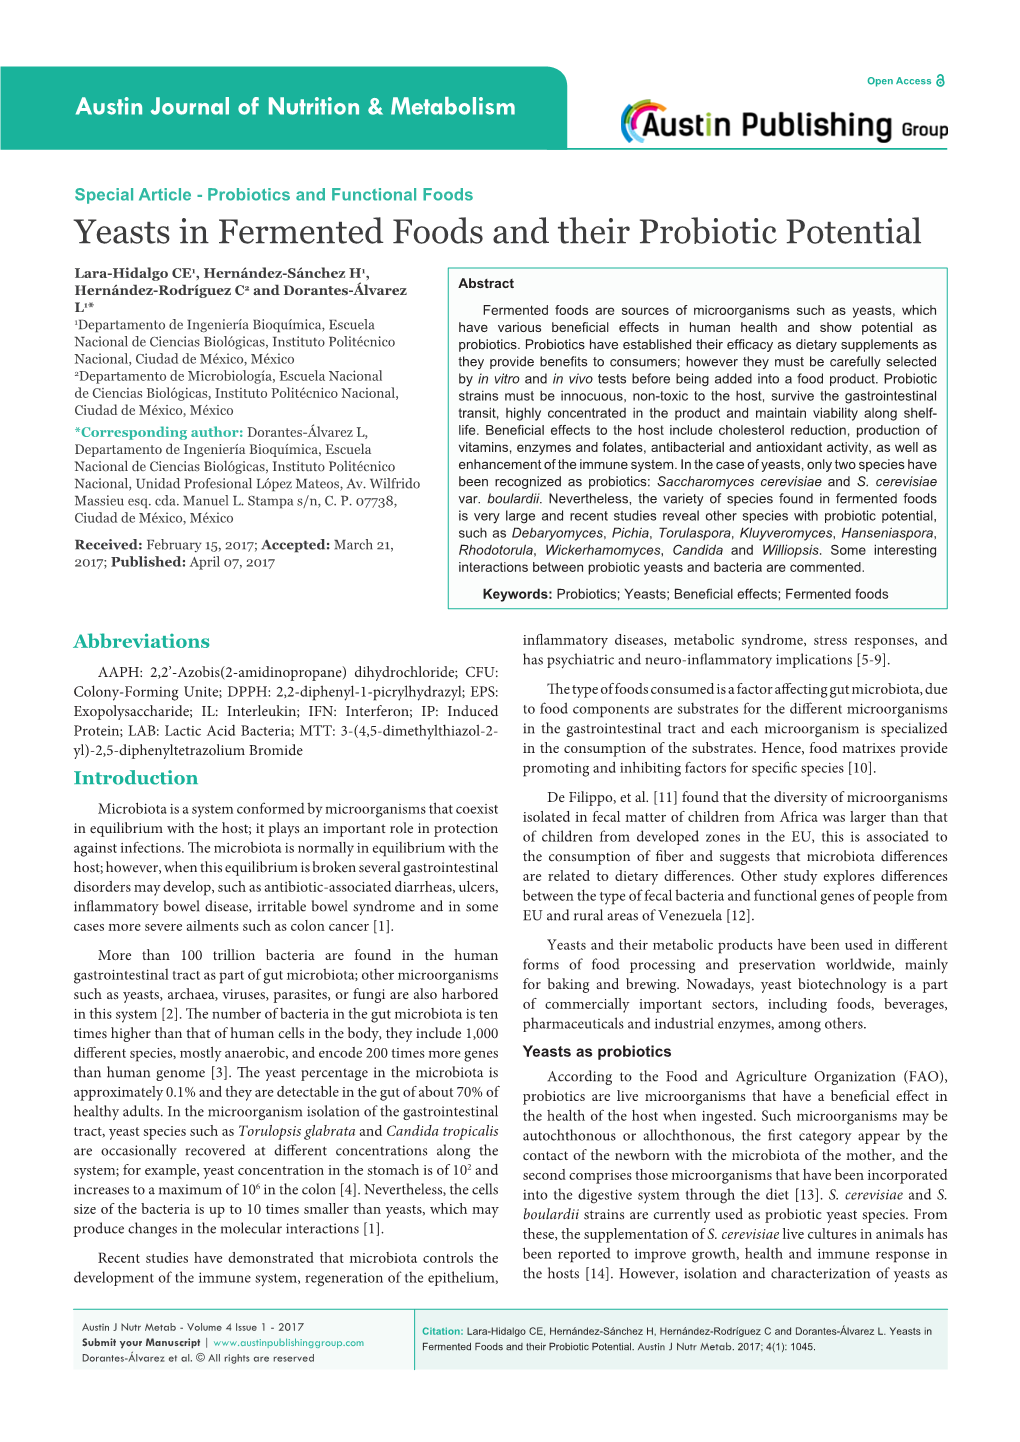 Yeasts in Fermented Foods and Their Probiotic Potential